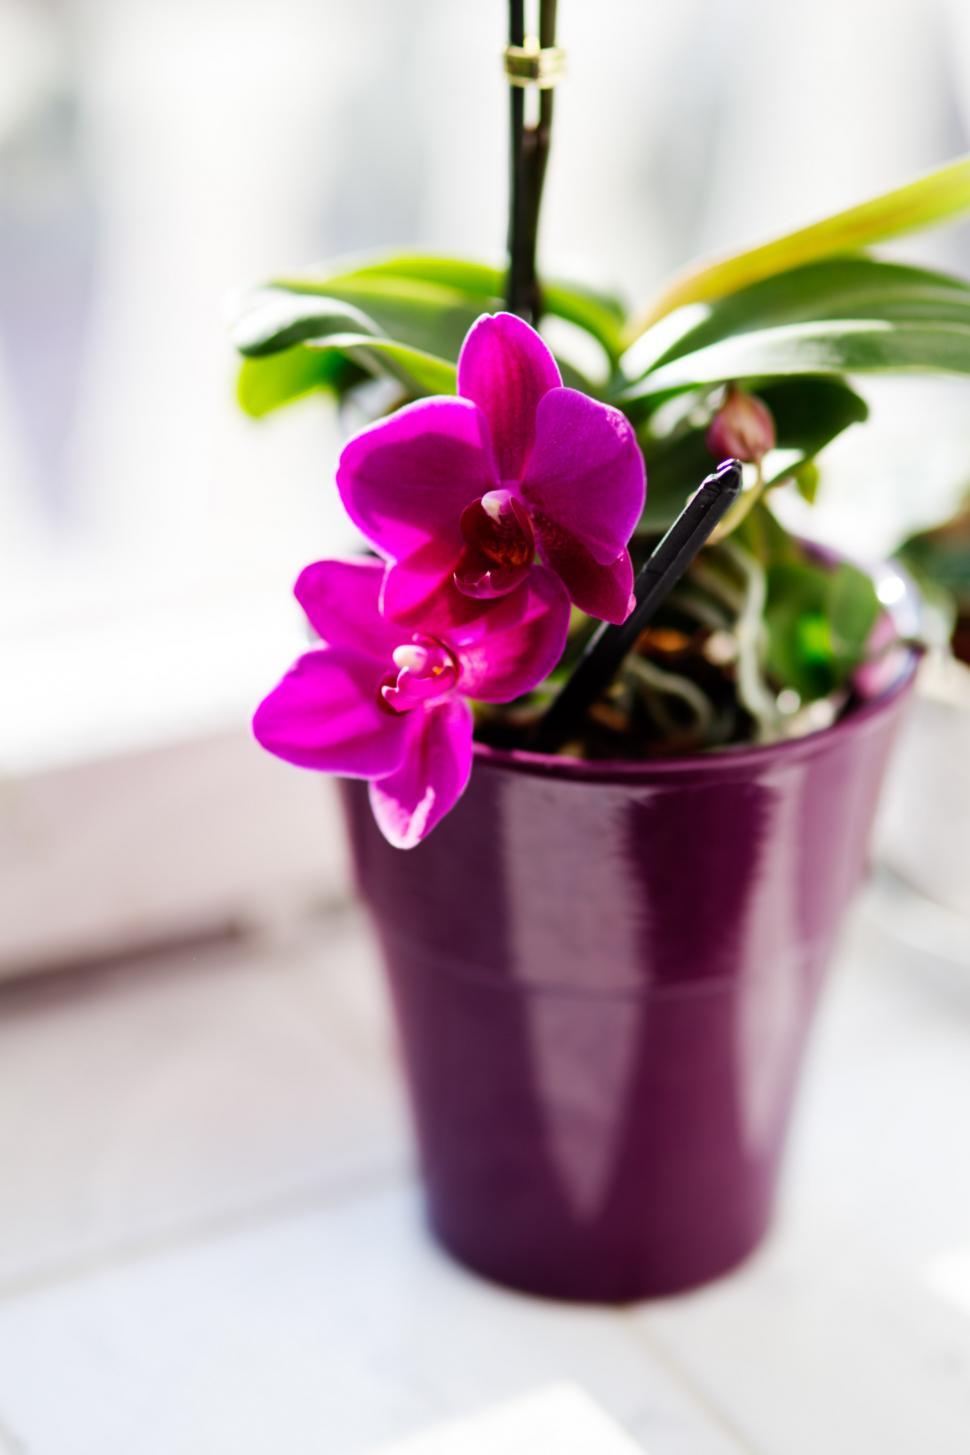 Free Image of Purple Potted Plant on Window Sill 